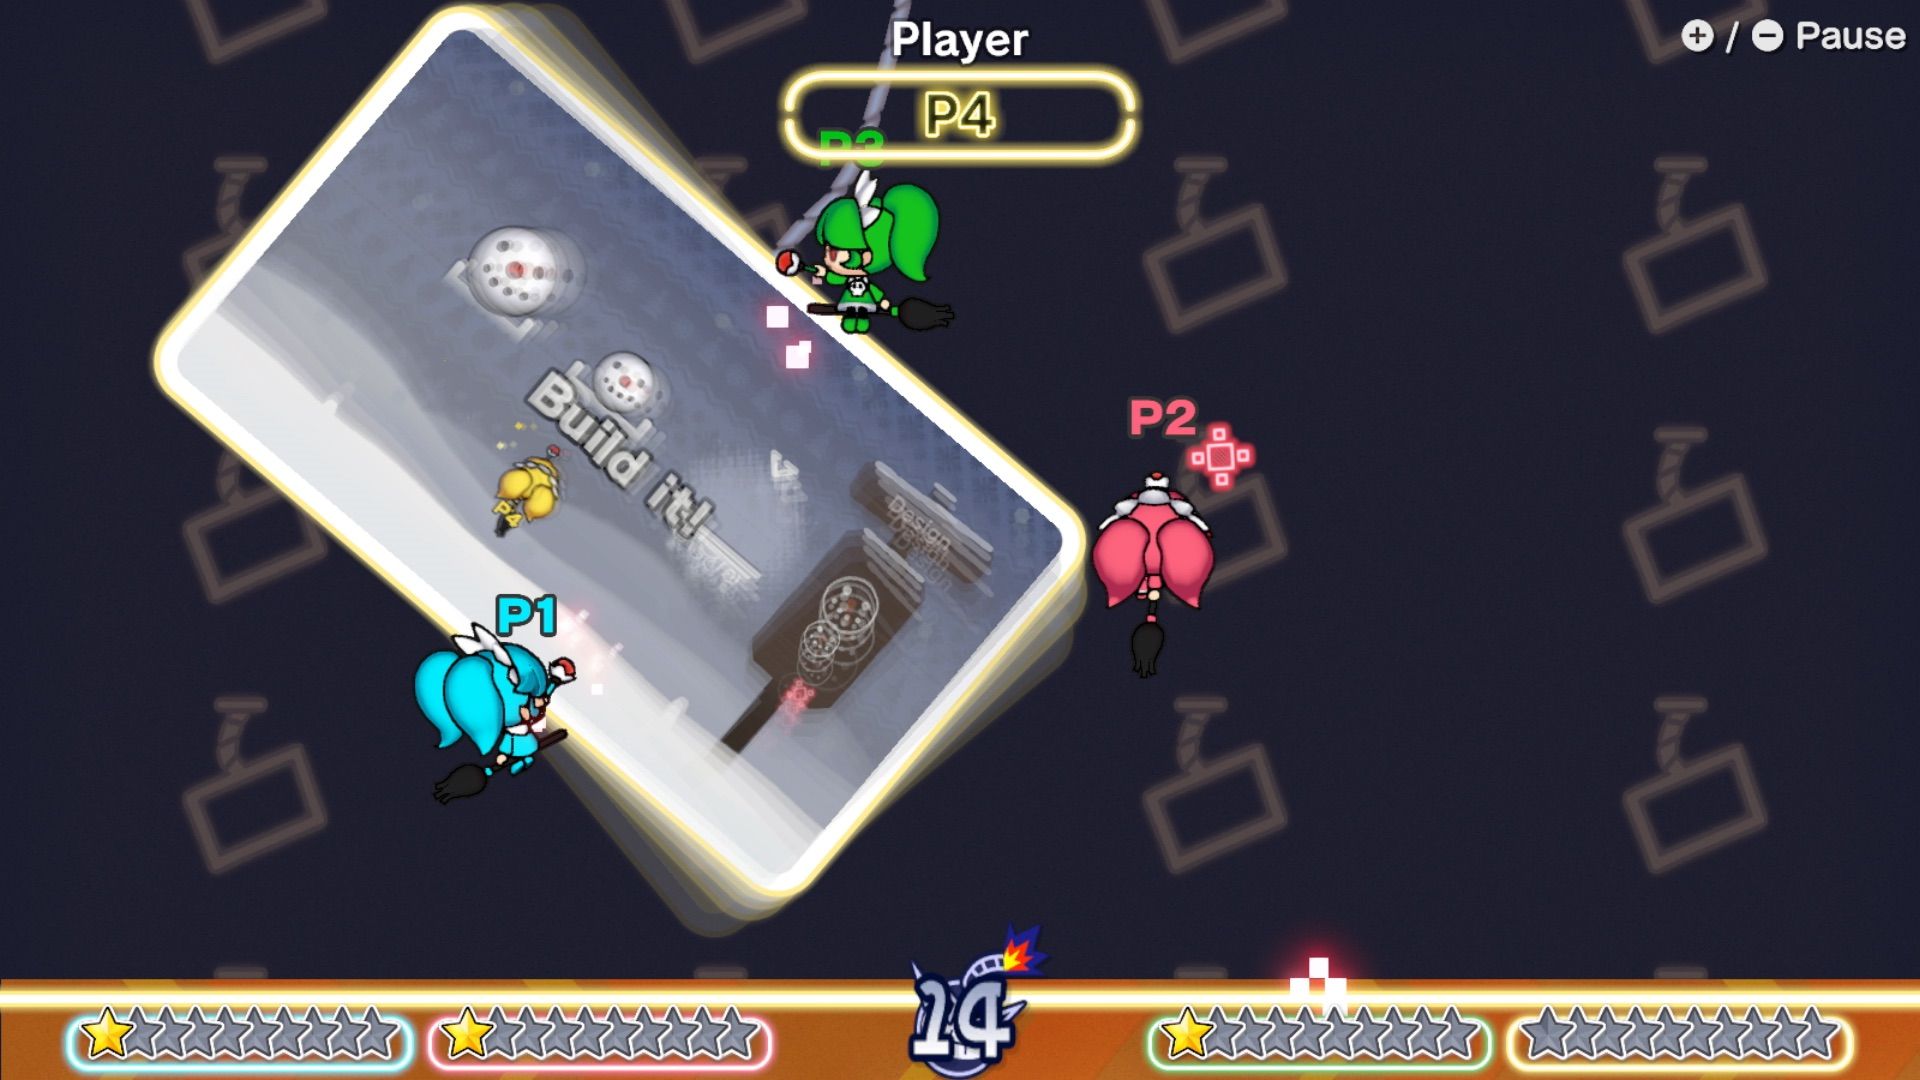 Video game screenshot of three characters shaking a smaller in-game screen on which another character is trying to complete a goal